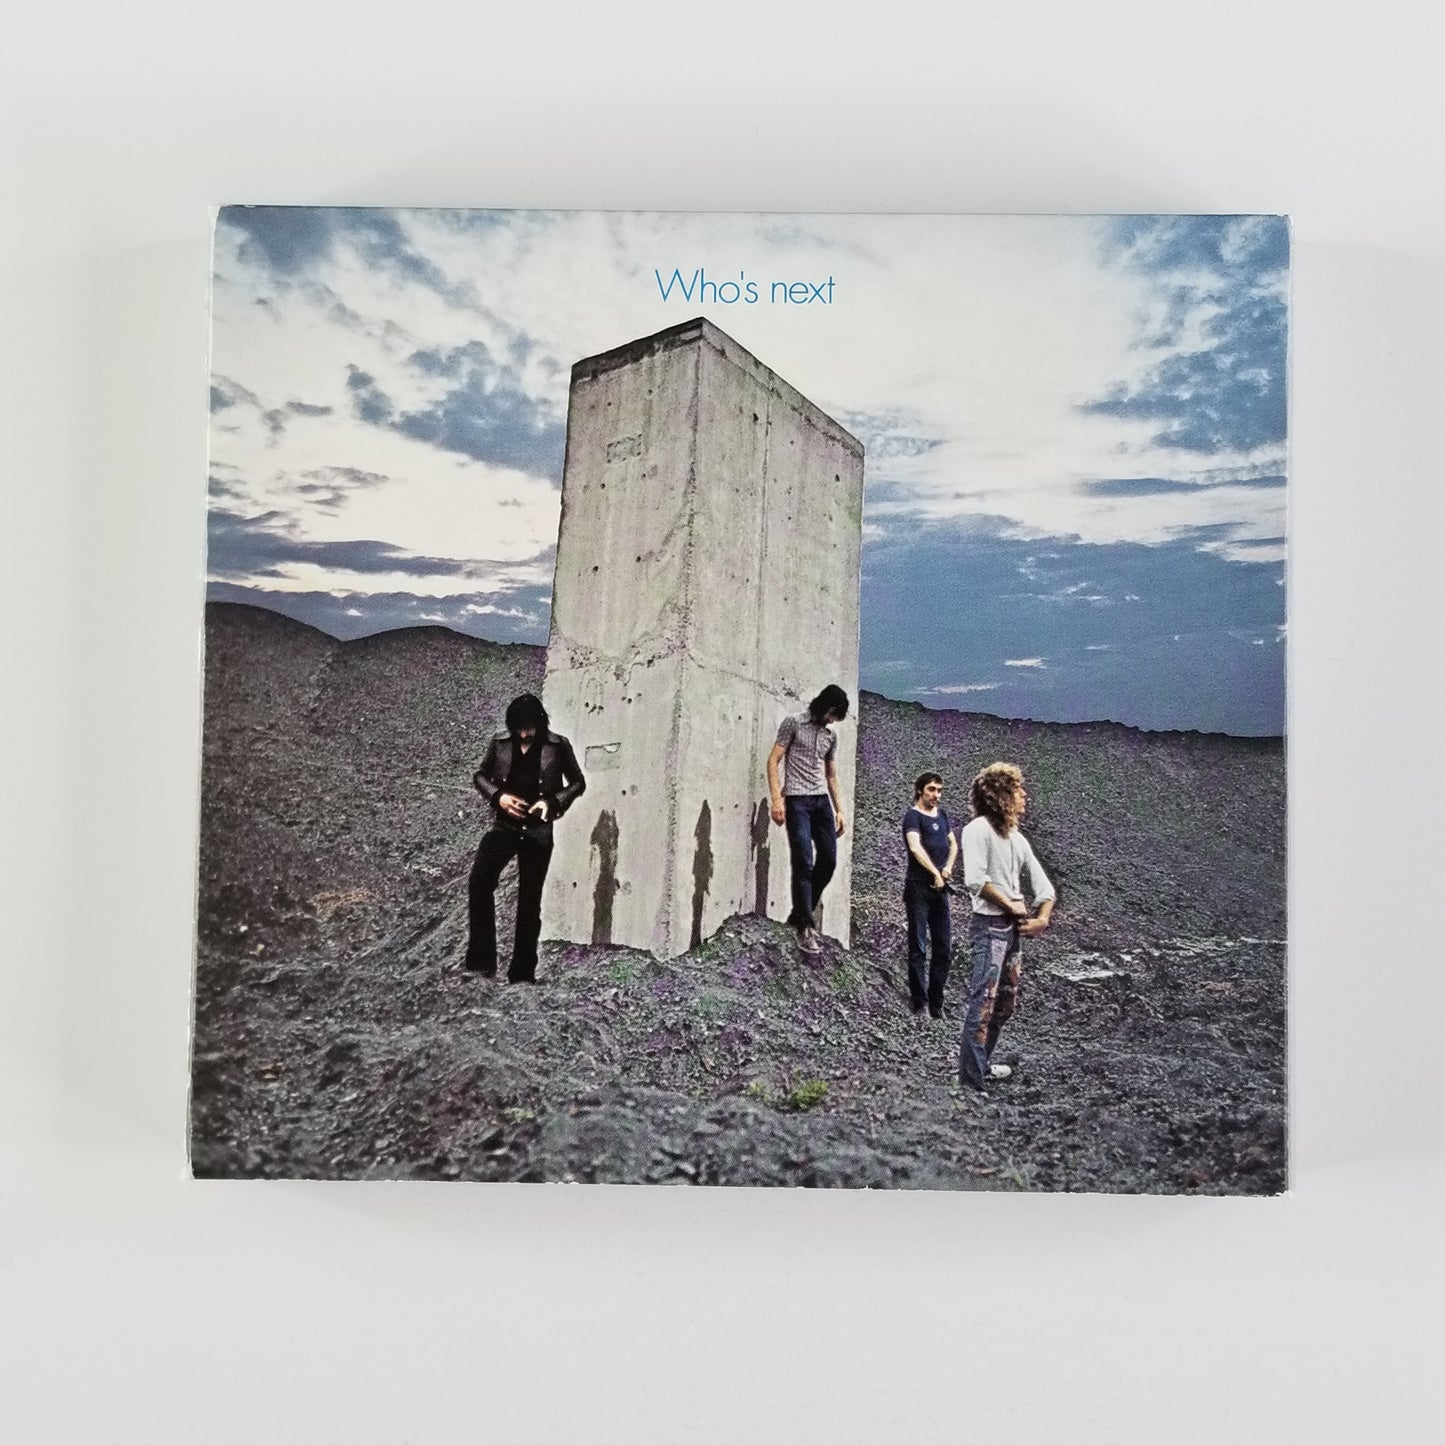 The Who - Who's Next [Deluxe Edition] (2003, 2x CD) 088 113 056-2